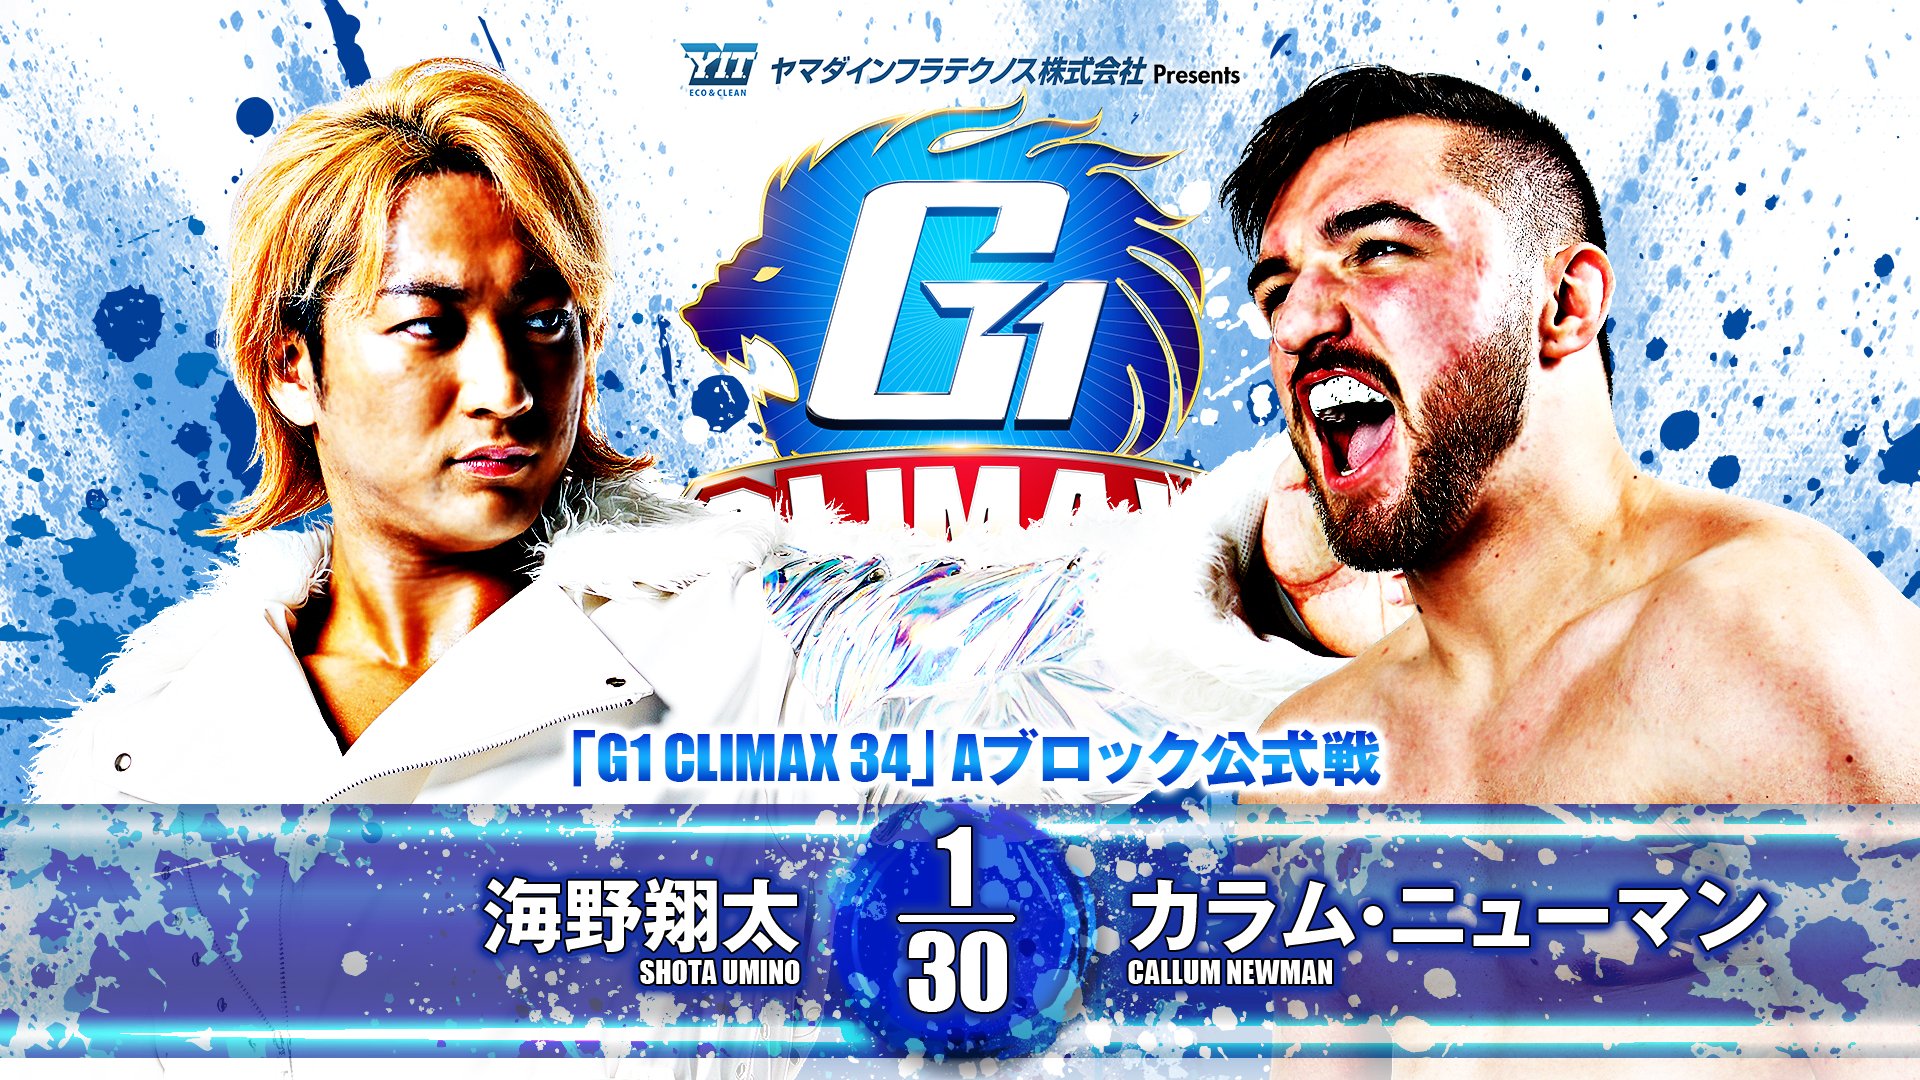 G1 Climax: Can New Three Musketeers Live Up To Iconic Name?